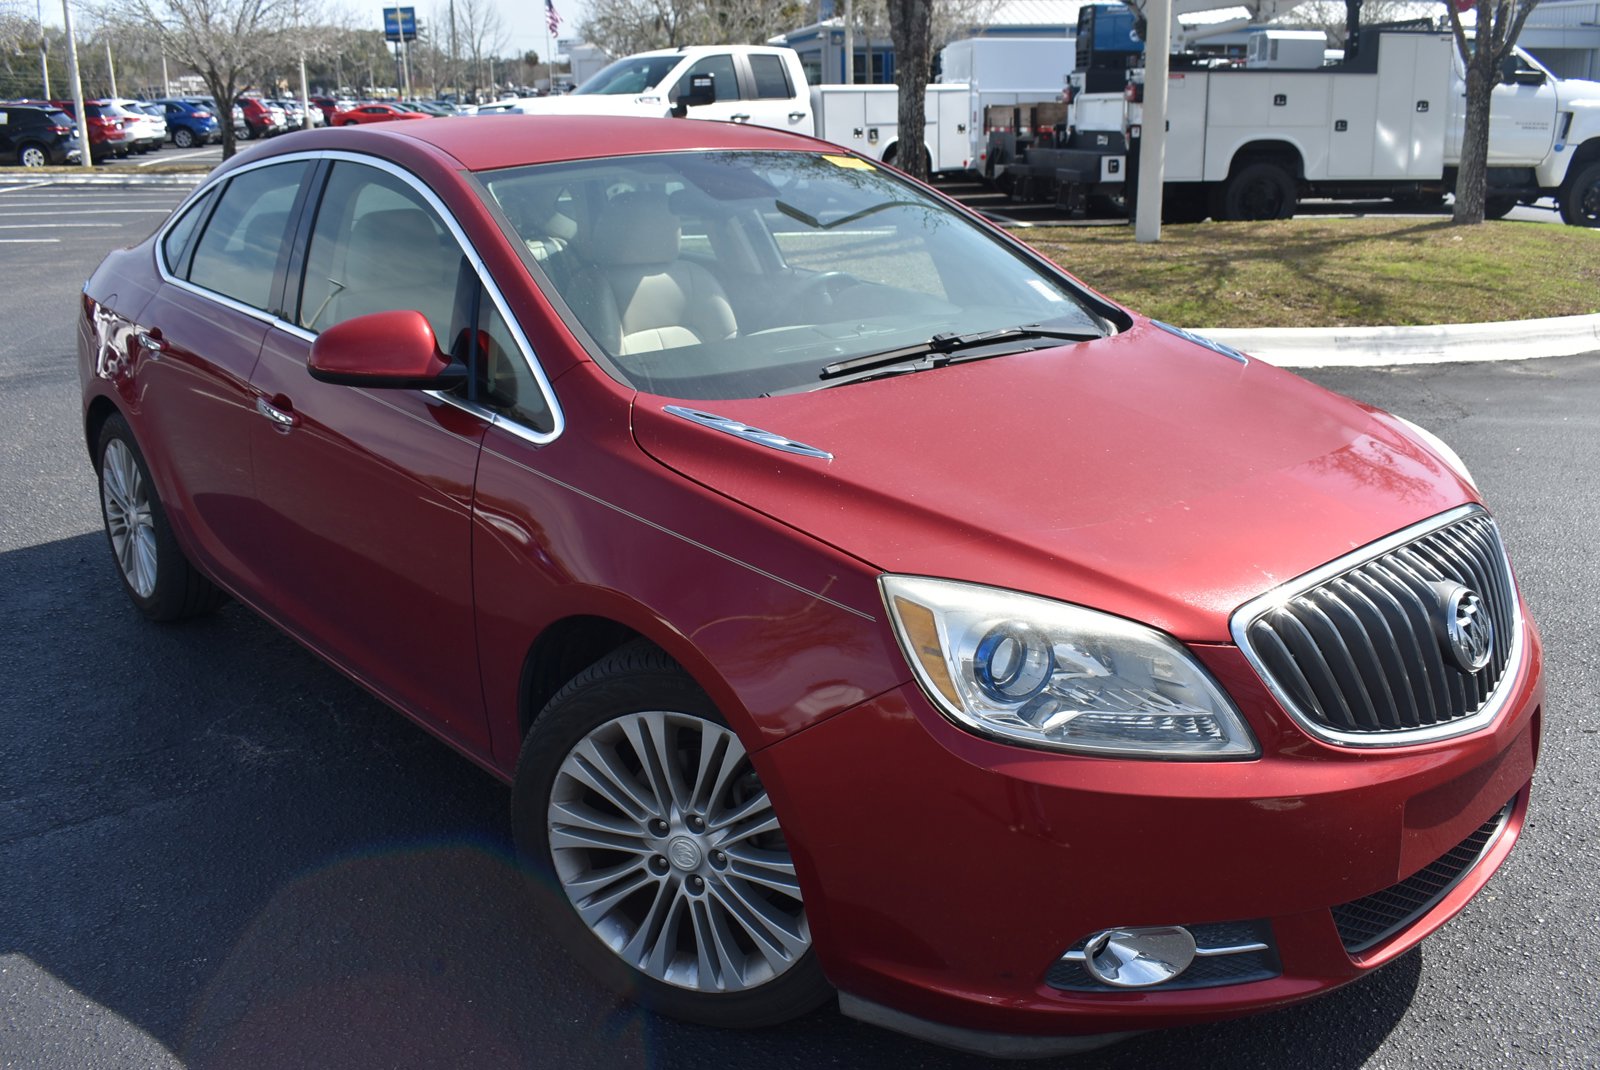 Pre-Owned 2014 Buick Verano 4dr Sdn Sedan in Cary #Q30366A | Hendrick Buick  GMC Cary